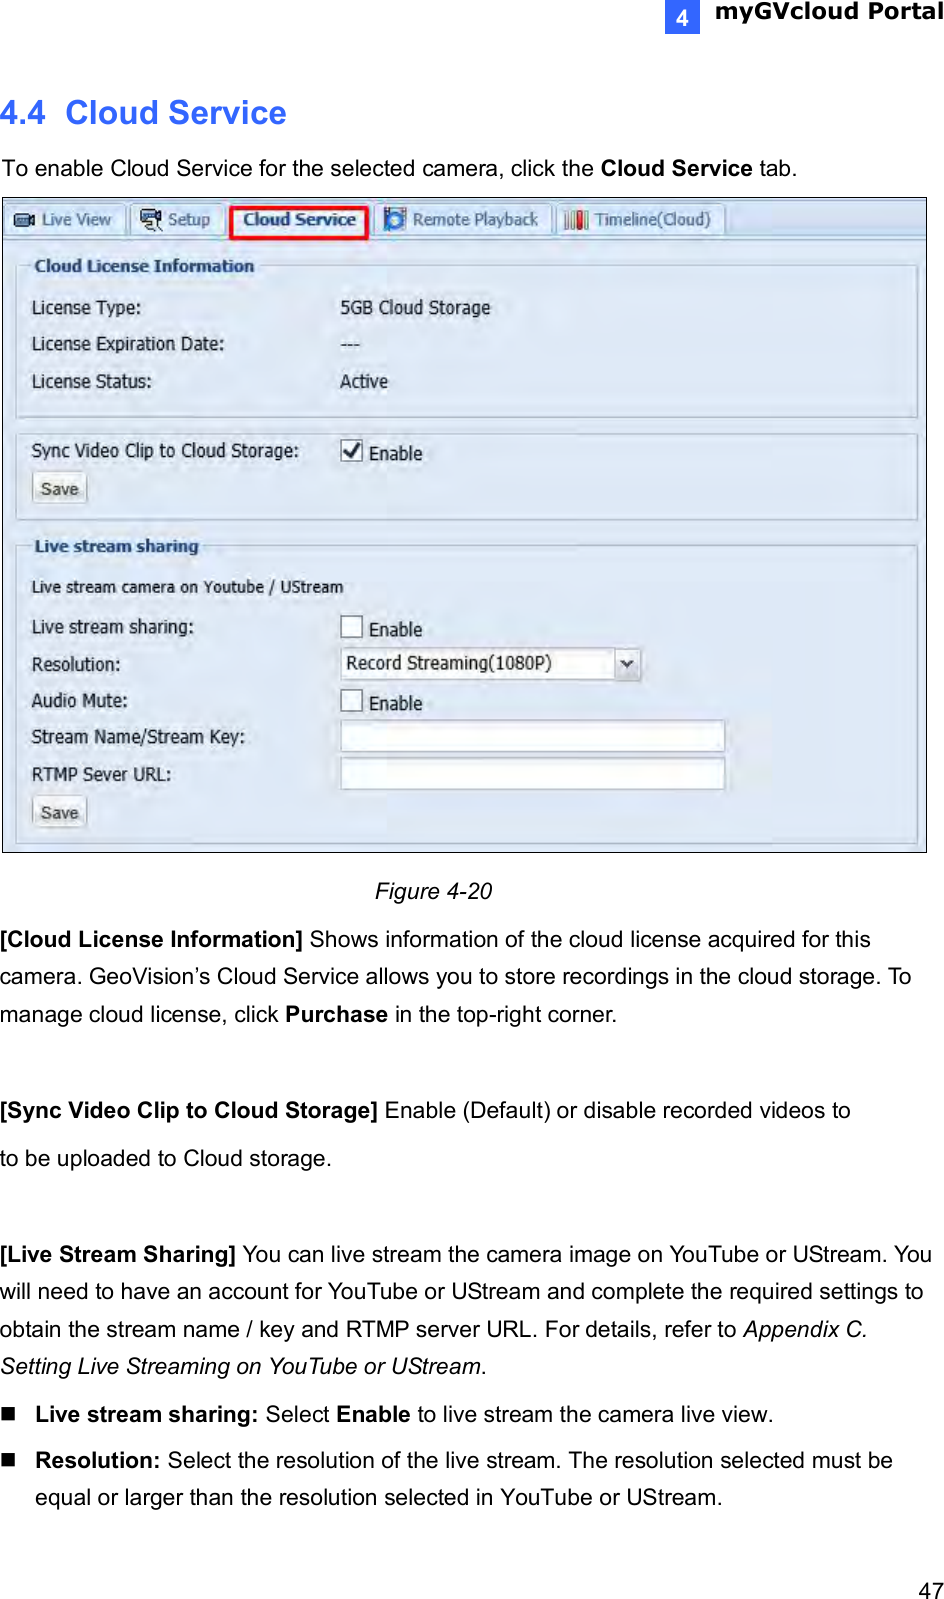  myGVcloud Portal    474 4.4  Cloud Service To enable Cloud Service for the selected camera, click the Cloud Service tab.   Figure 4-20  [Cloud License Information] Shows information of the cloud license acquired for this camera. GeoVision’s Cloud Service allows you to store recordings in the cloud storage. To manage cloud license, click Purchase in the top-right corner.  [Sync Video Clip to Cloud Storage] Enable (Default) or disable recorded videos to  to be uploaded to Cloud storage.   [Live Stream Sharing] You can live stream the camera image on YouTube or UStream. You will need to have an account for YouTube or UStream and complete the required settings to obtain the stream name / key and RTMP server URL. For details, refer to Appendix C. Setting Live Streaming on YouTube or UStream.  Live stream sharing: Select Enable to live stream the camera live view.   Resolution: Select the resolution of the live stream. The resolution selected must be equal or larger than the resolution selected in YouTube or UStream. 